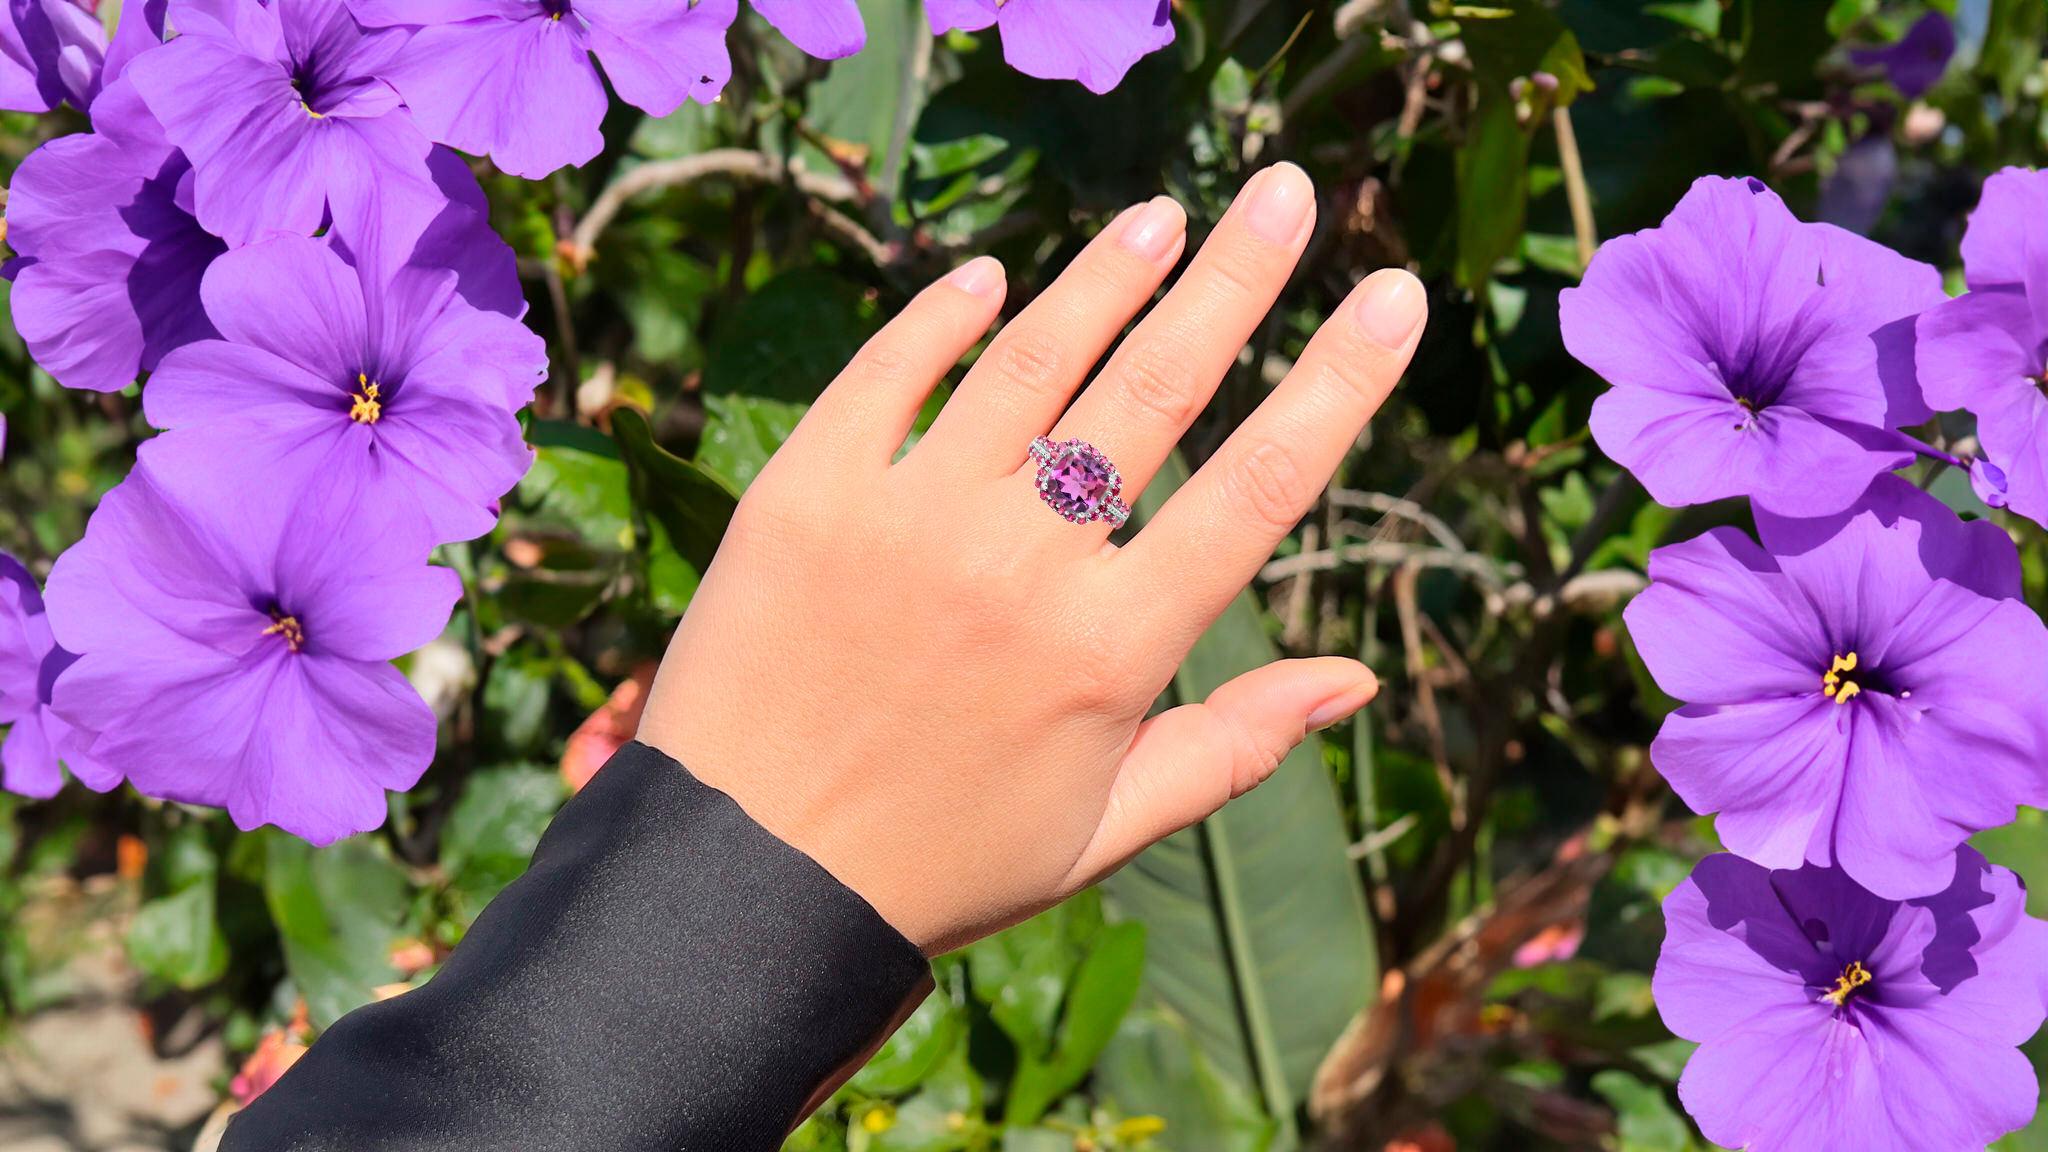 It comes with the Gemological Appraisal by GIA GG/AJP
All Gemstones are Natural
Amethyst = 3.55 Carats
32 Rhodolites = 1.45 Carats
Metal: Rhodium Plated Sterling Silver
Ring Size: 7* US
*It can be resized complimentary